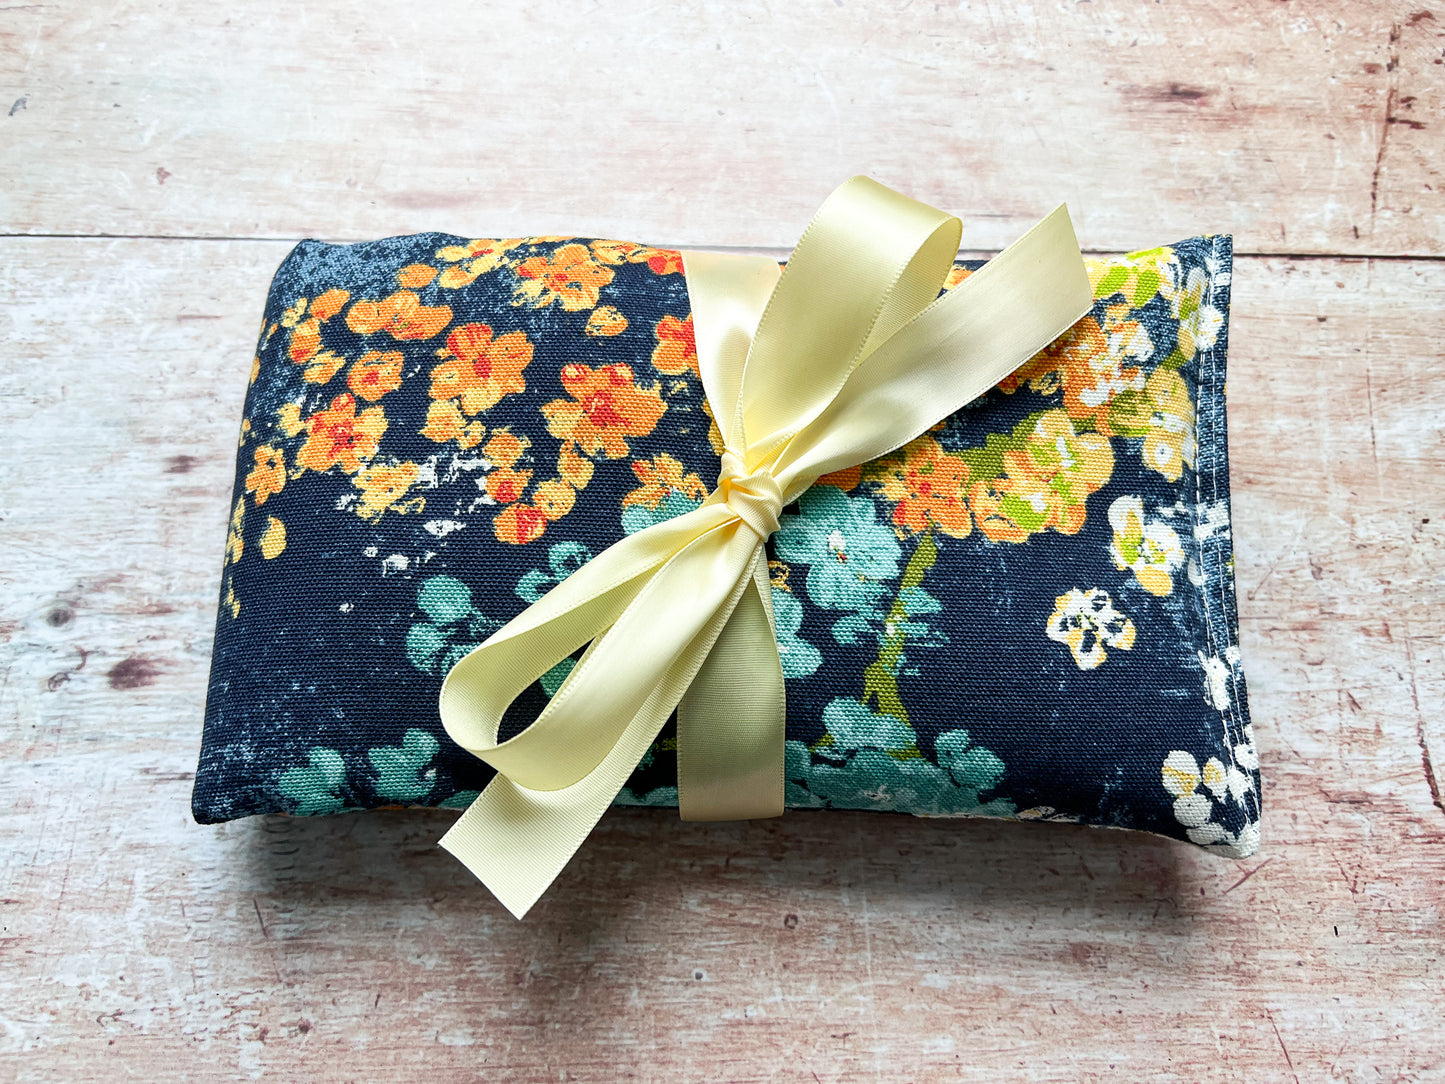 Flax and Lavender Microwaveable Heat Pack - Warming Pillow with Lavender and Flax